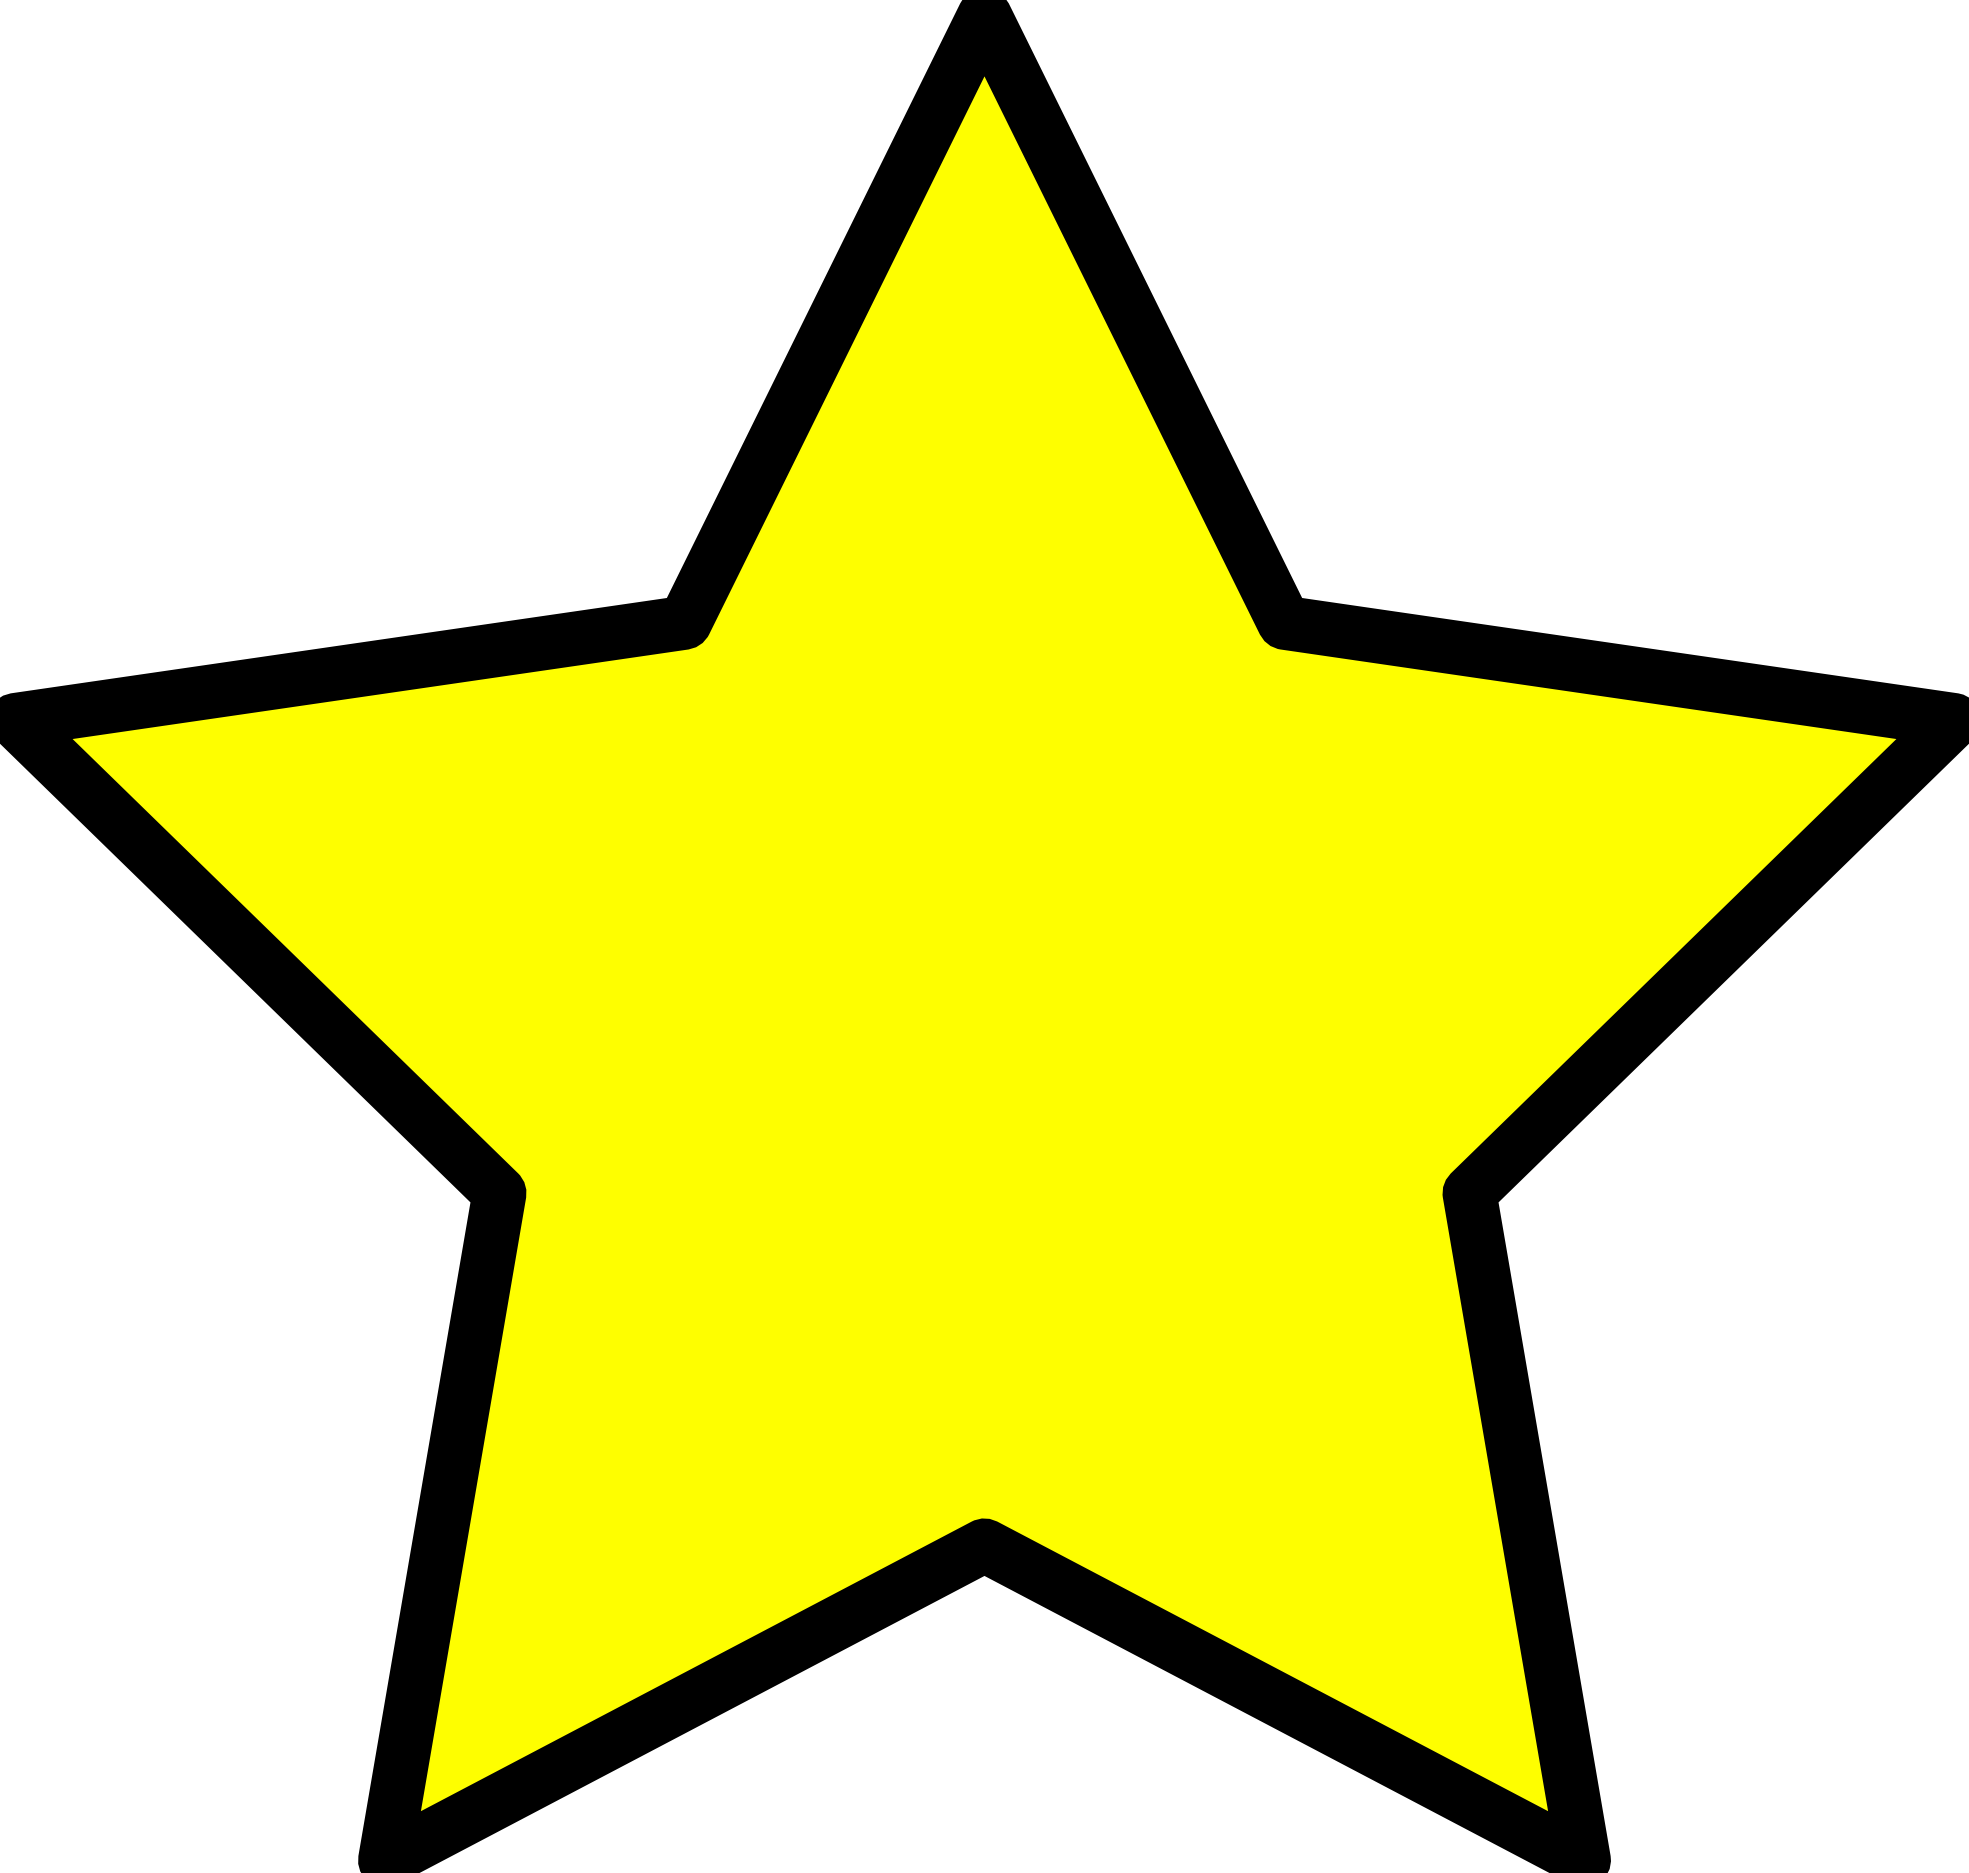 A yellow rounded star.